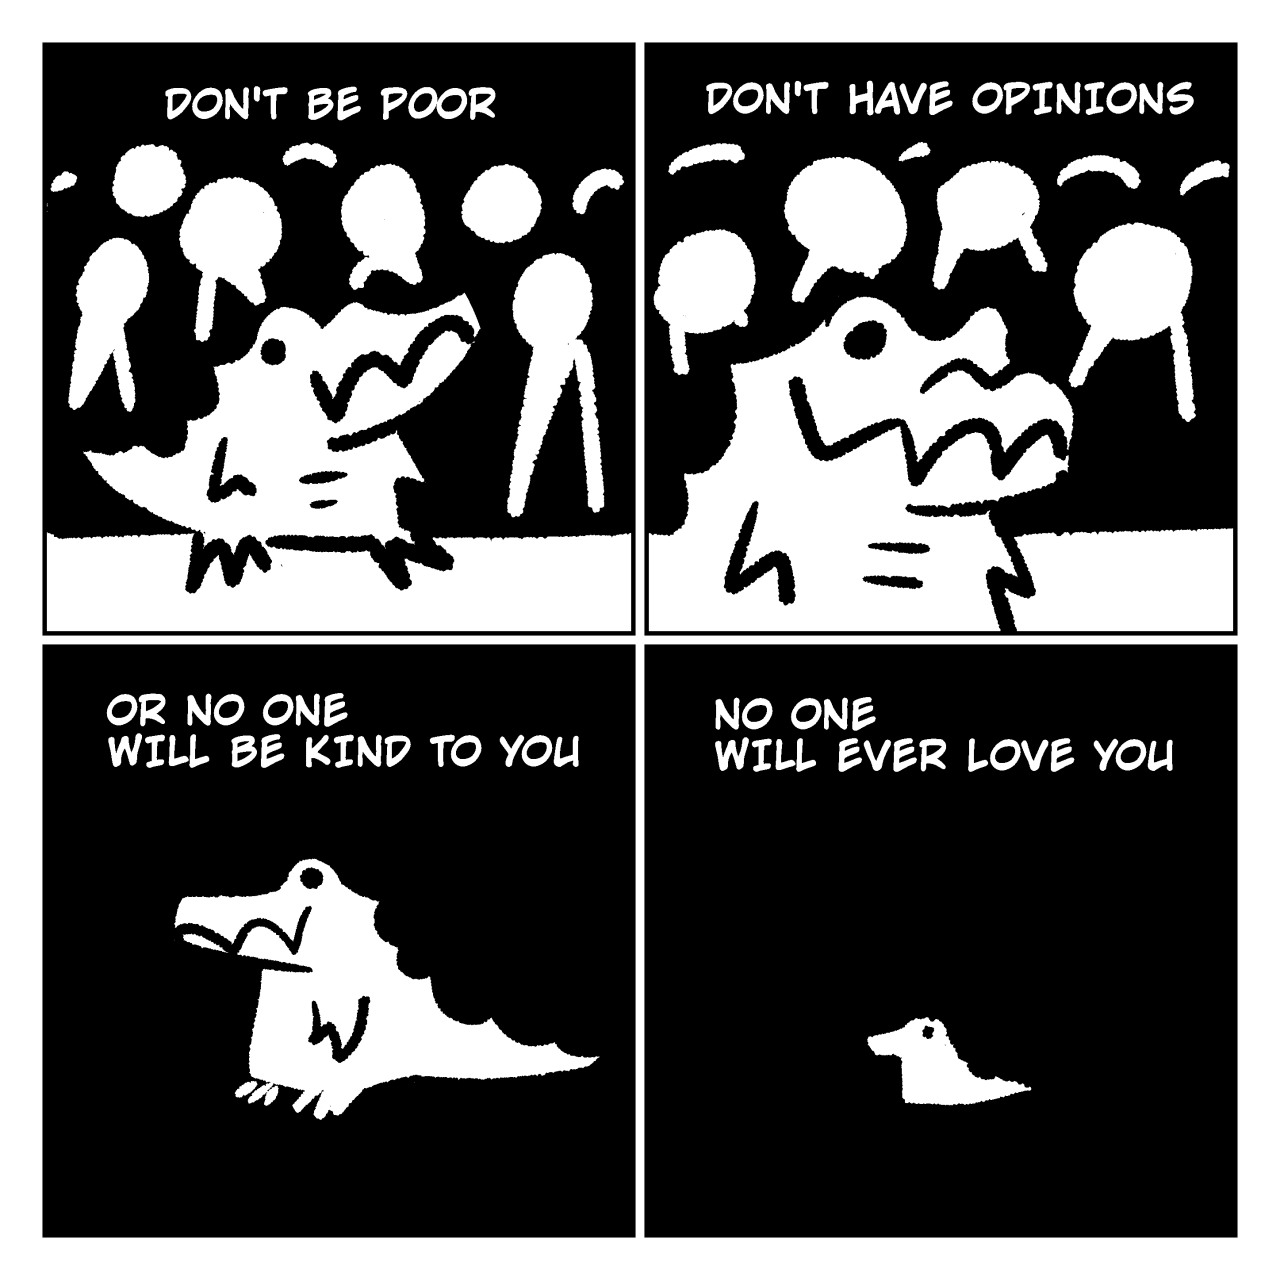 DON'T BE POOR. DON'T HAVE OPINIONS. OR NO ONE WILL BE KIND TO YOU. OR NO ONE WILL EVER LOVE YOU.